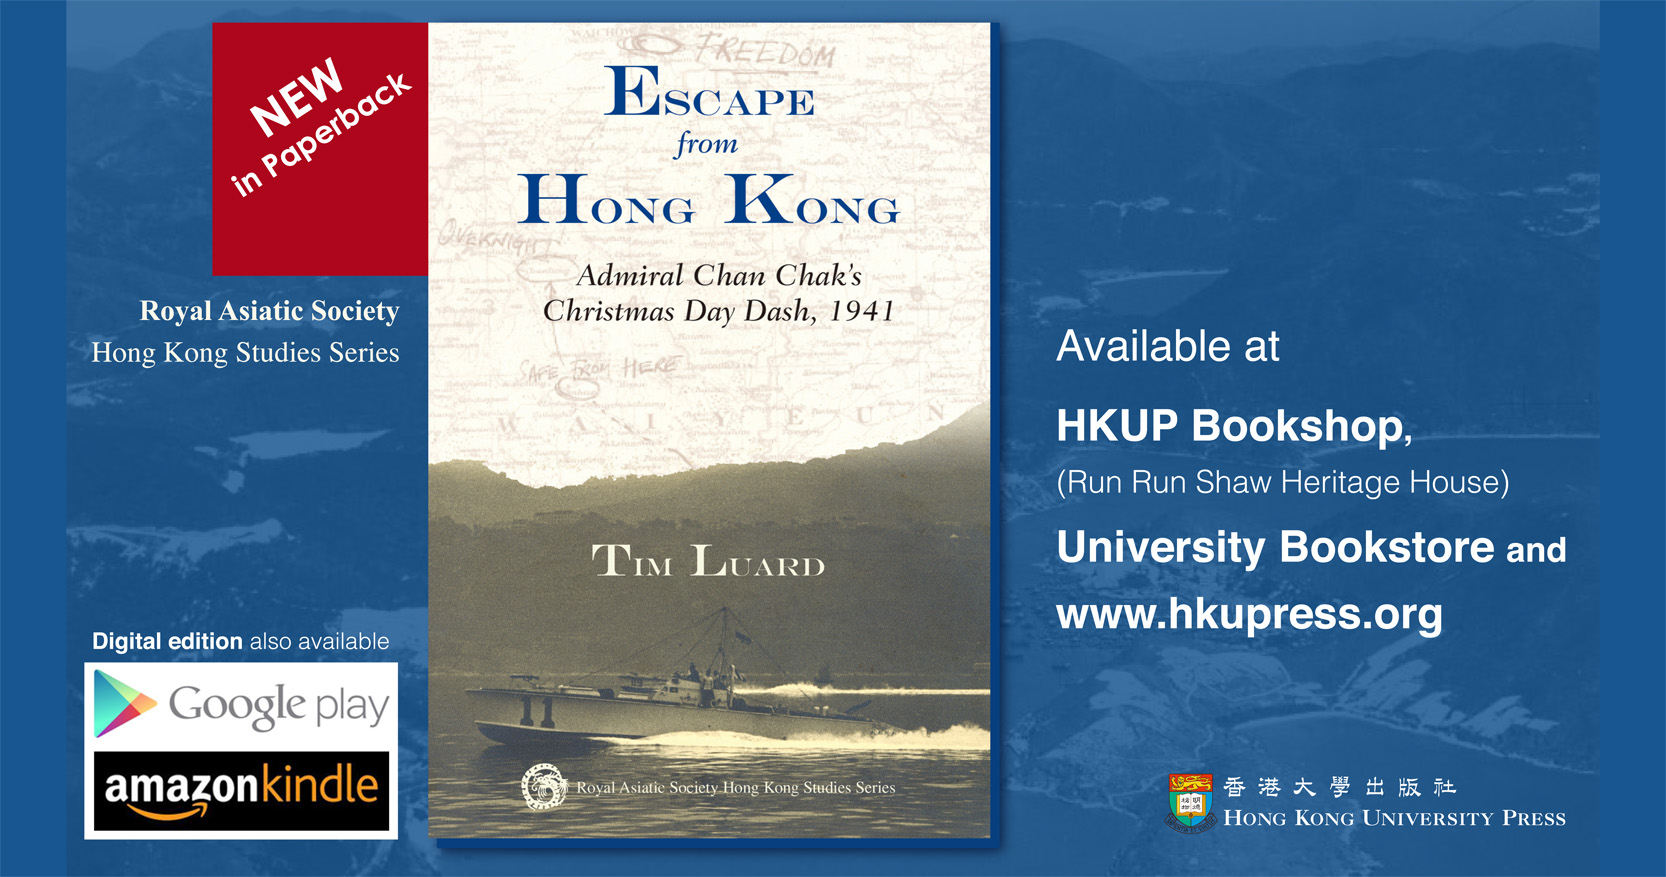 Escape from Hong Kong: New in Paperback!